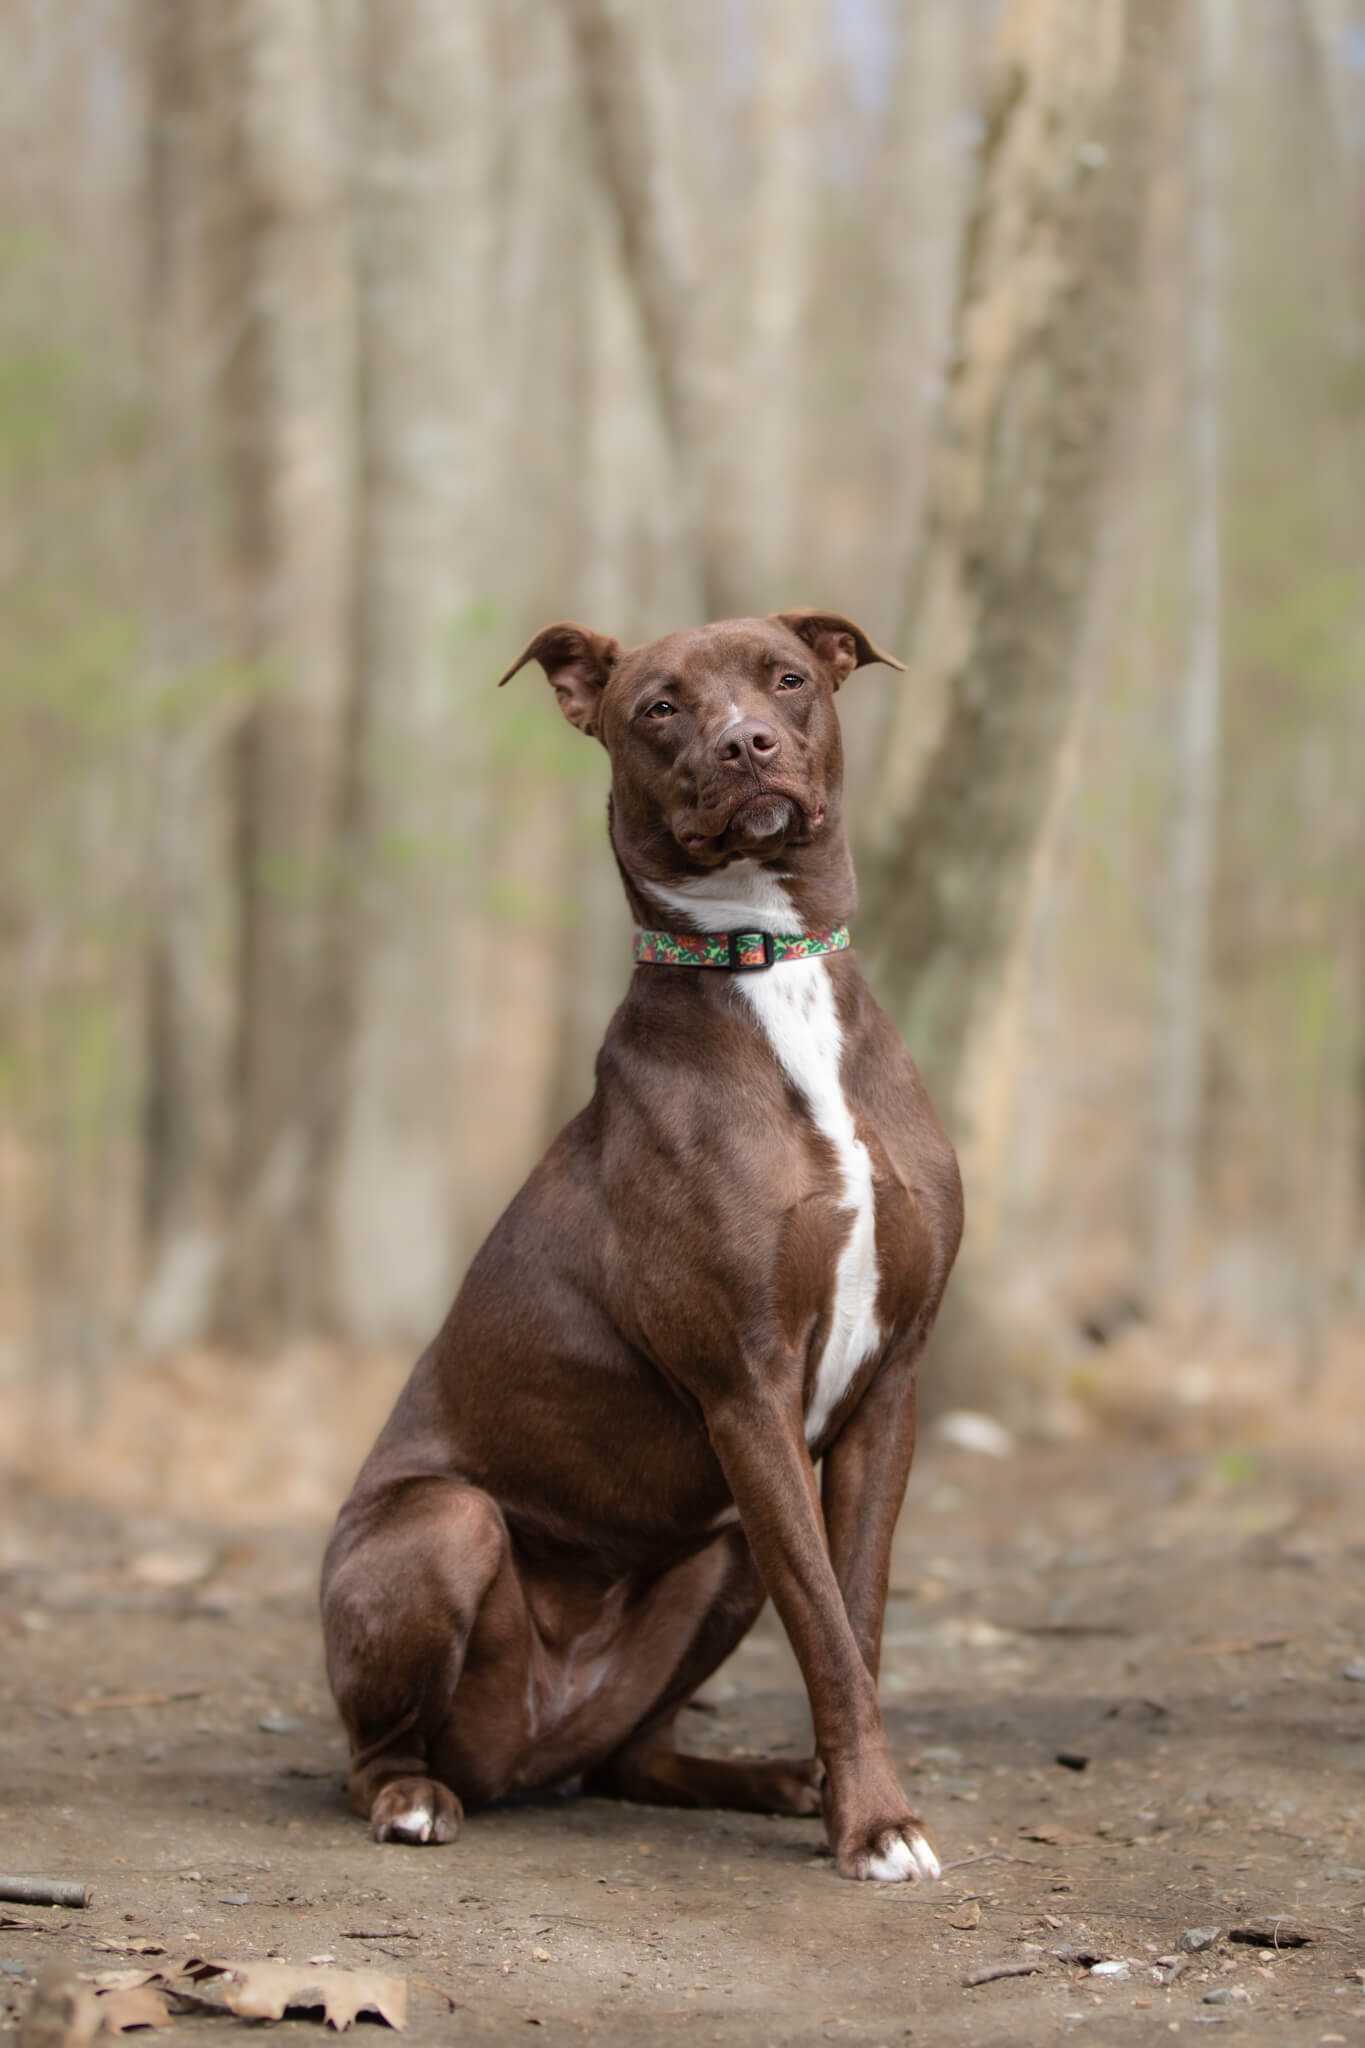 Young brown dog with white chest sits in a forest path questions to ask when adopting a dog